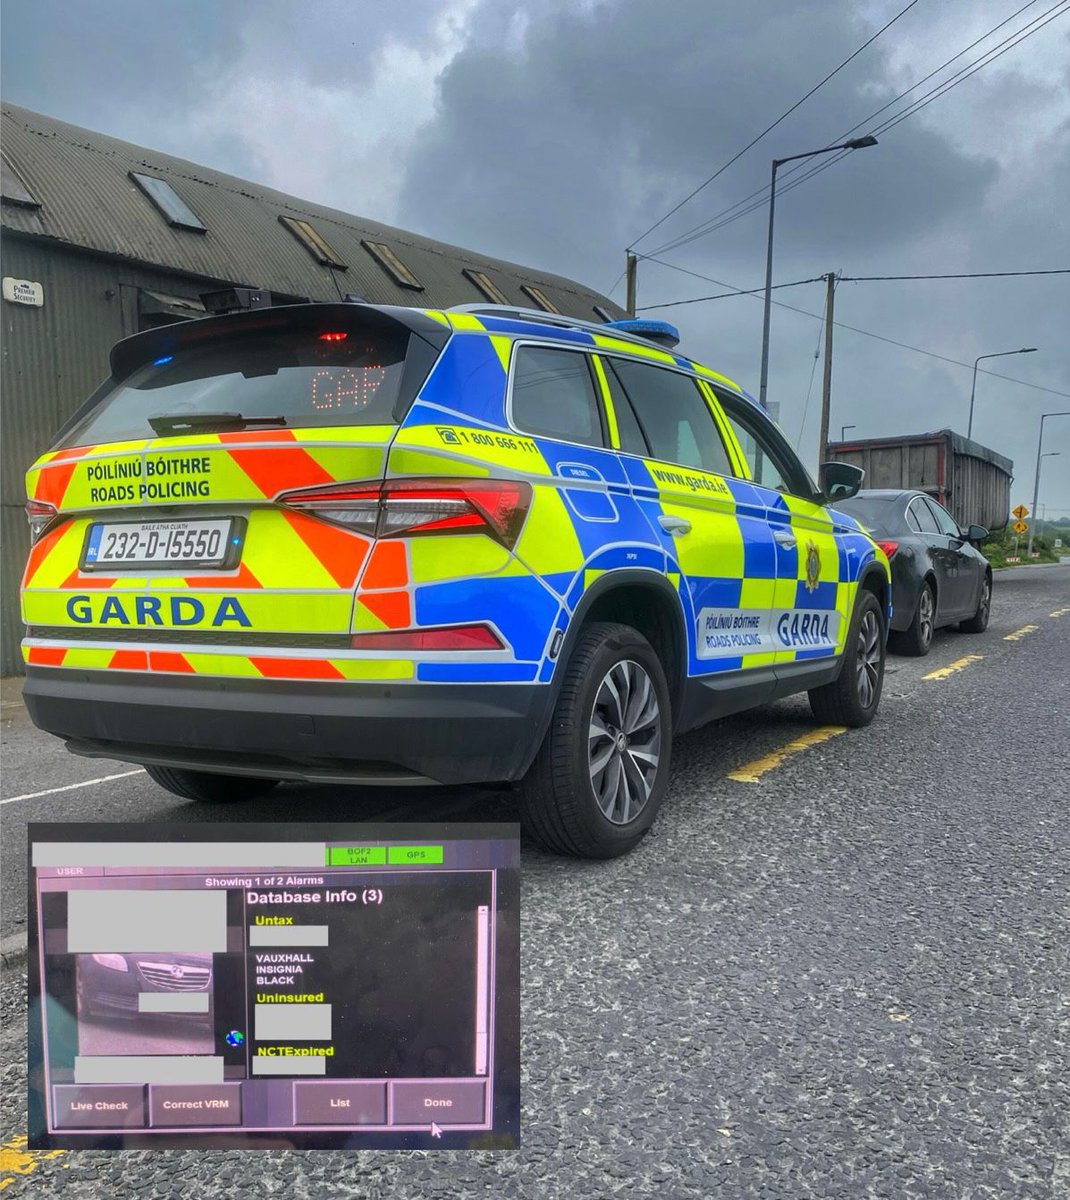 Tipperary Roads Policing Unit were on patrol in Cashel and were alerted to his car by the automatic number-plate recognition system in their jeep.

The car had no NCT or tax and was also uninsured. 

We impounded it and the driver will face court at a later date.

#SaferRoads